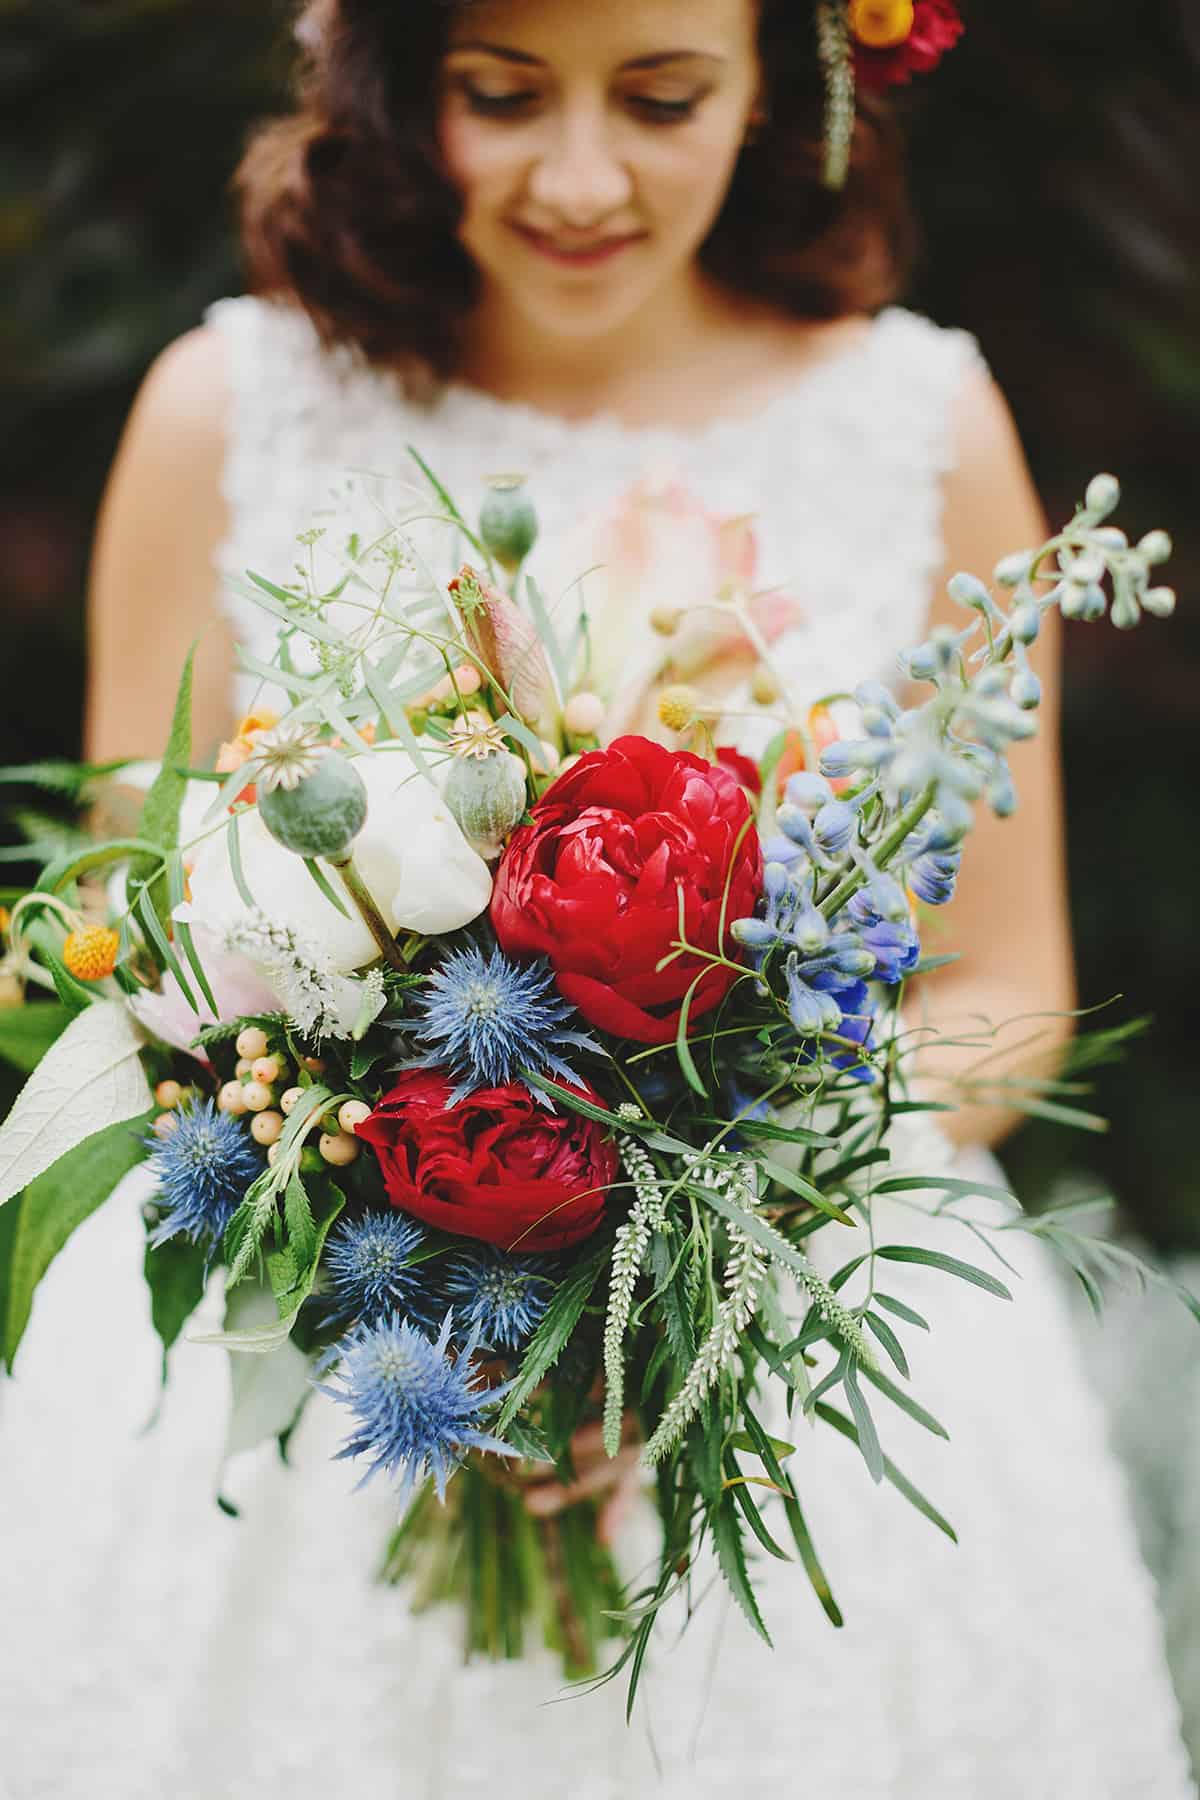 Vibrant wedding bouquet by Bunched Together | Photography by Jonathan Ong Melbourne wedding photographer